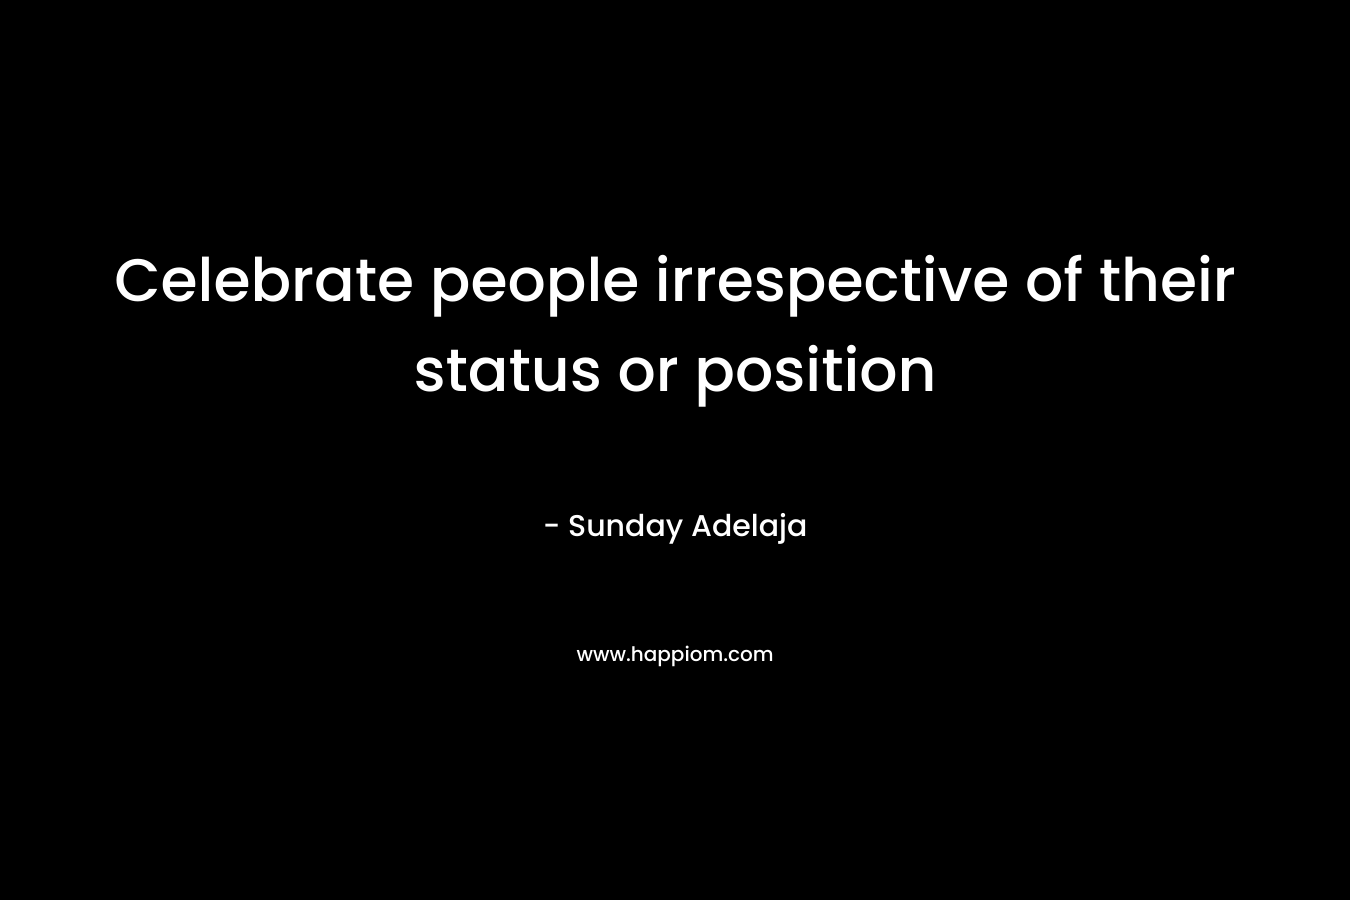 Celebrate people irrespective of their status or position